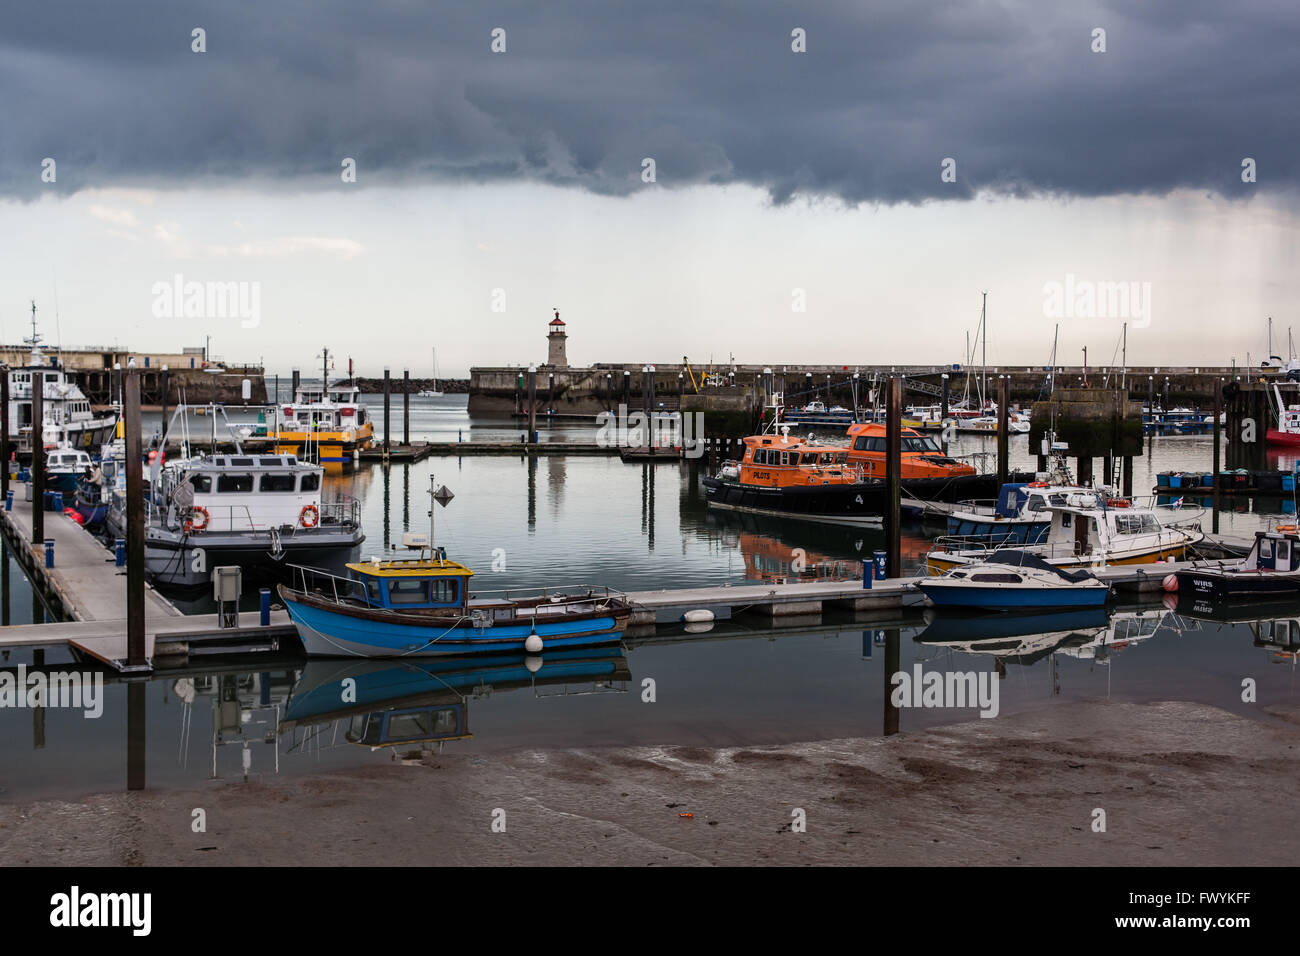 Very dark clouds approaching seaside harbour with boats Stock Photo